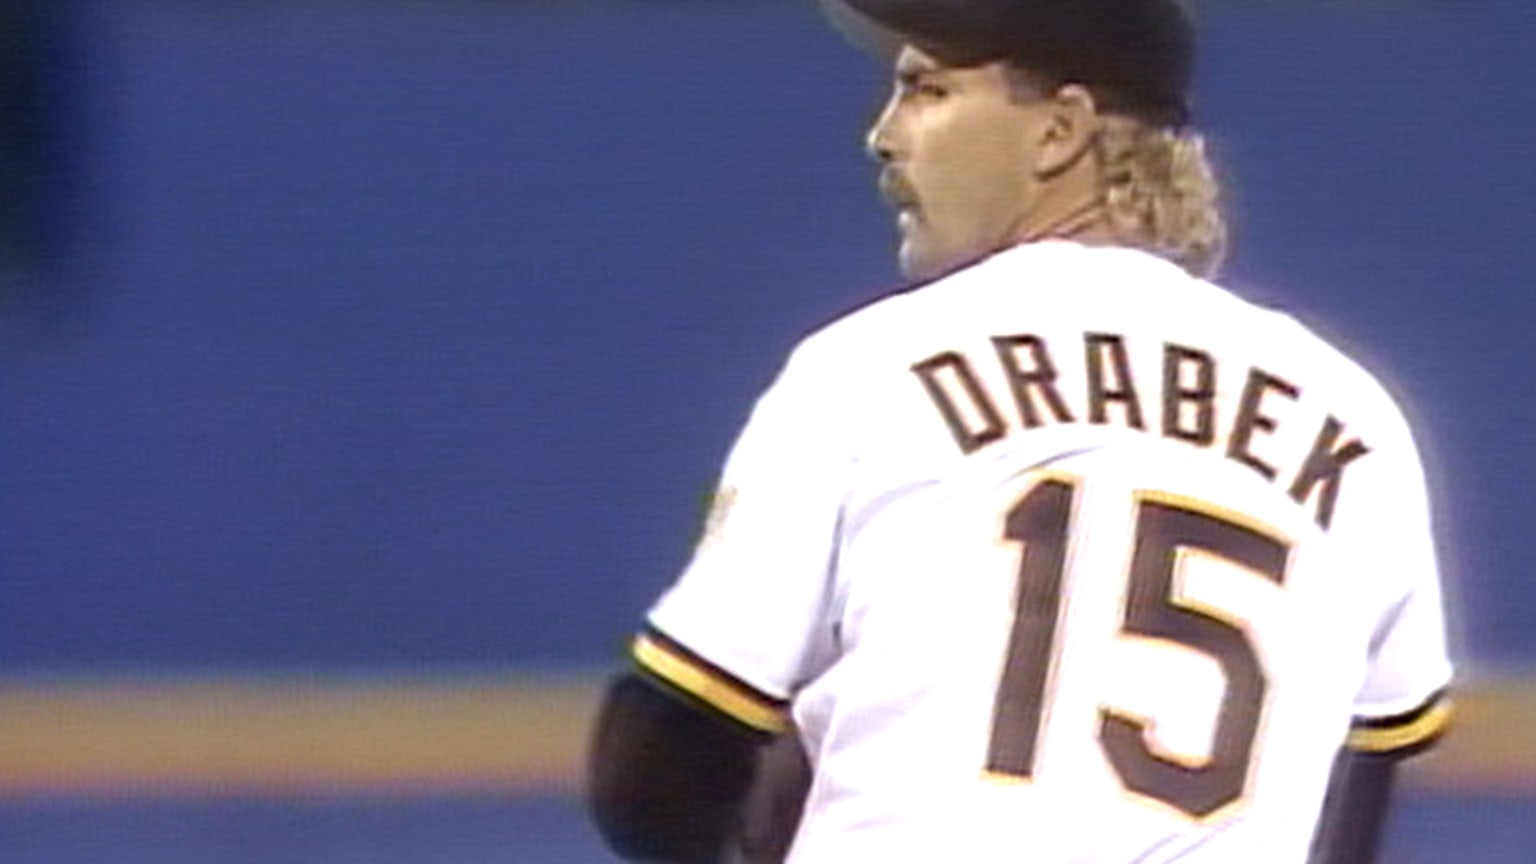 Doug Drabek on his Cy Young year, 02/12/2022